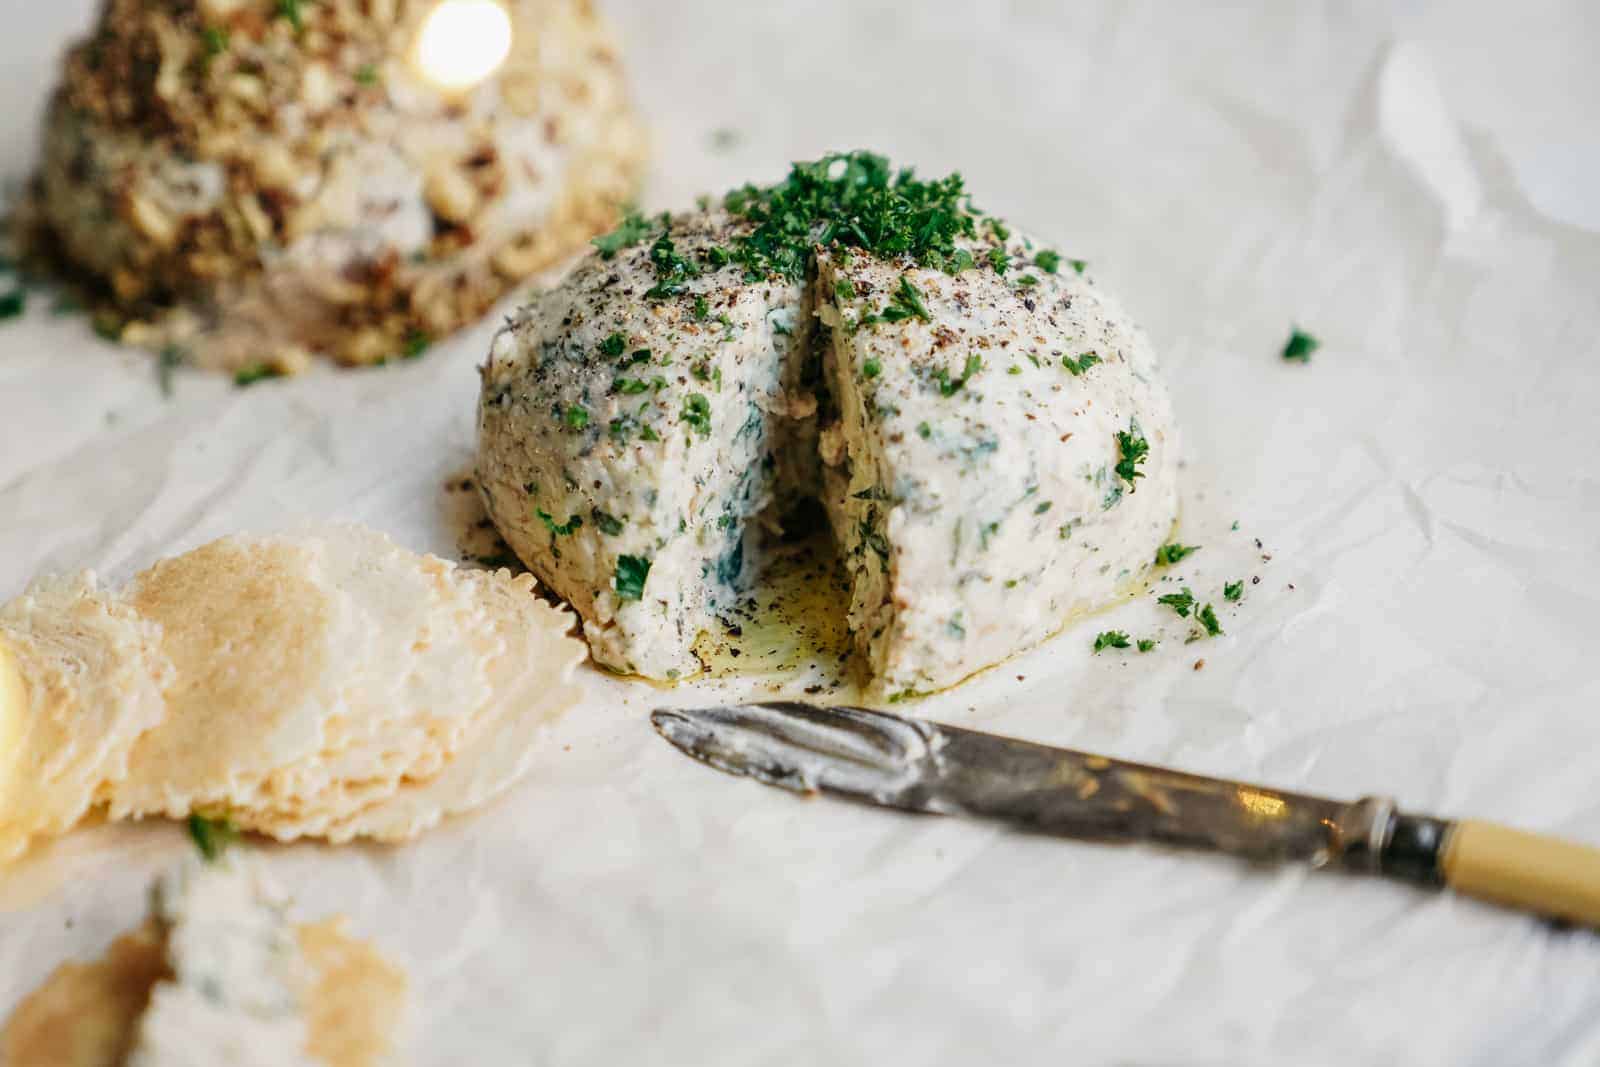 Cheese ball, a great vegan Easter recipe for a snack or appetizer